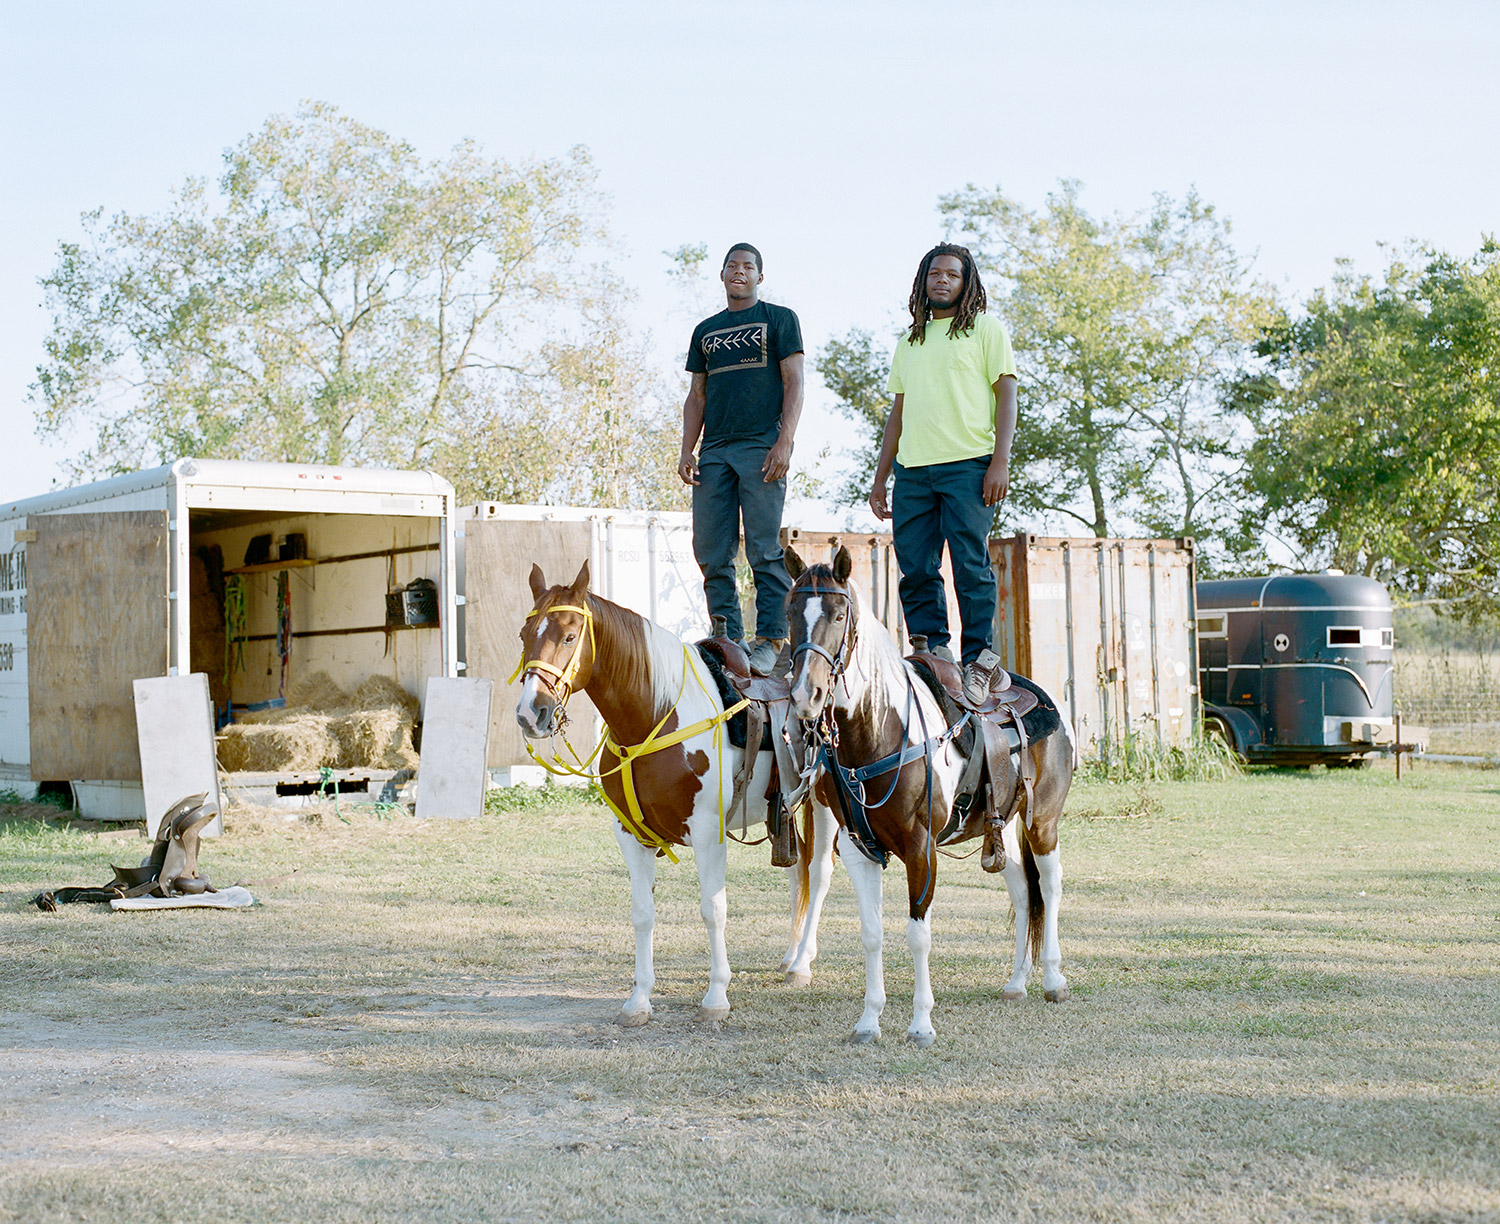 Devence and Dwayne balance on their horses. 2014